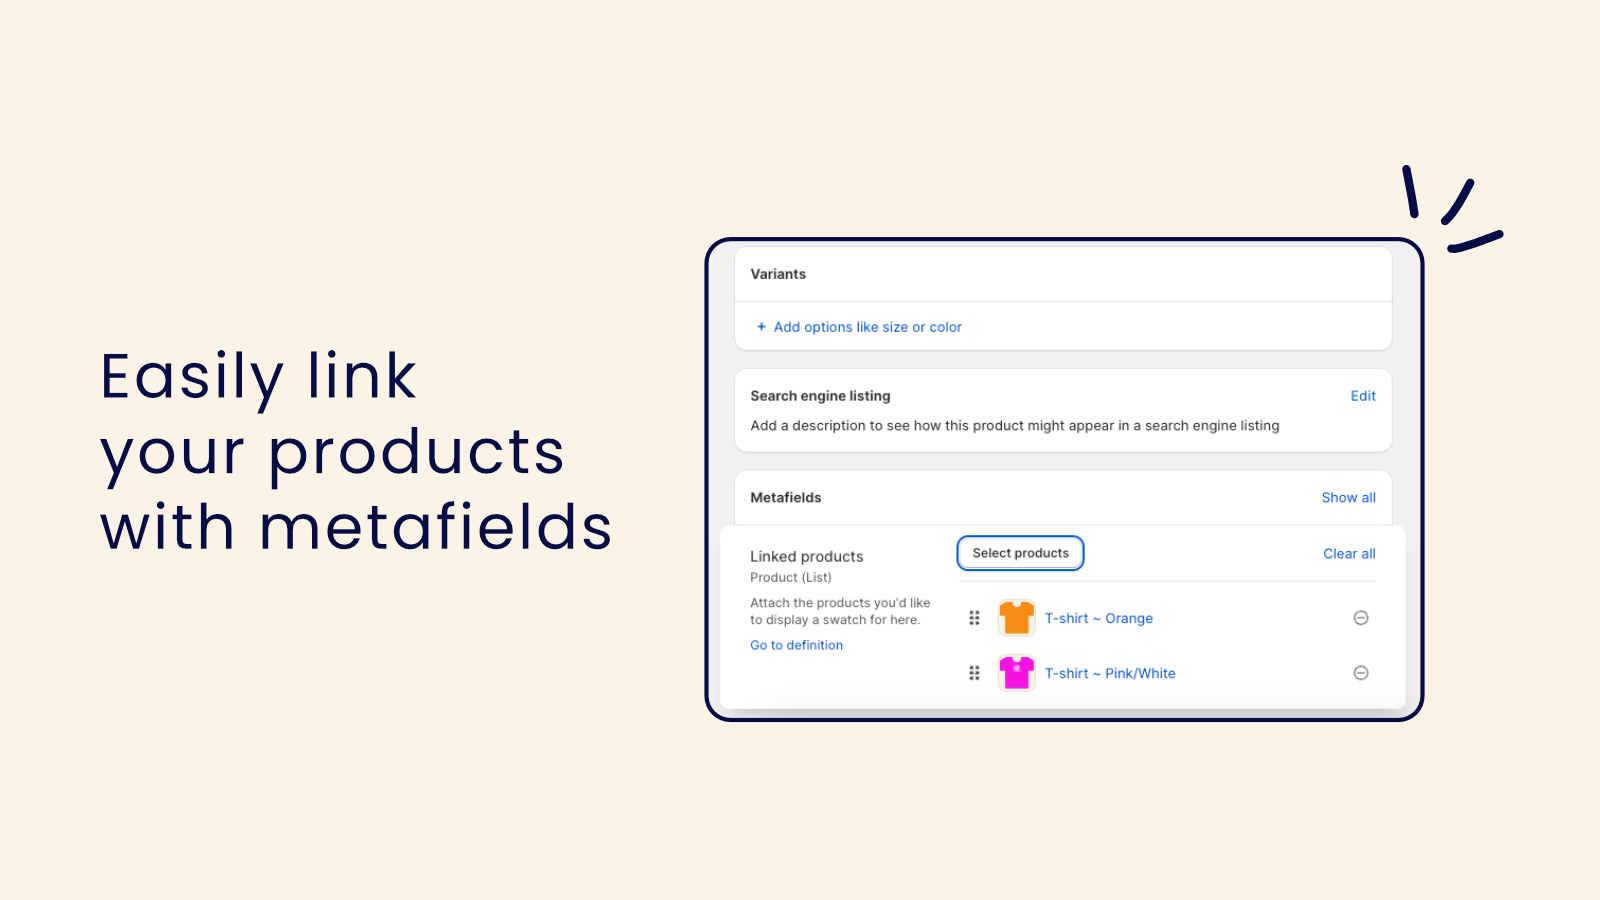 Easily link your products with metafields